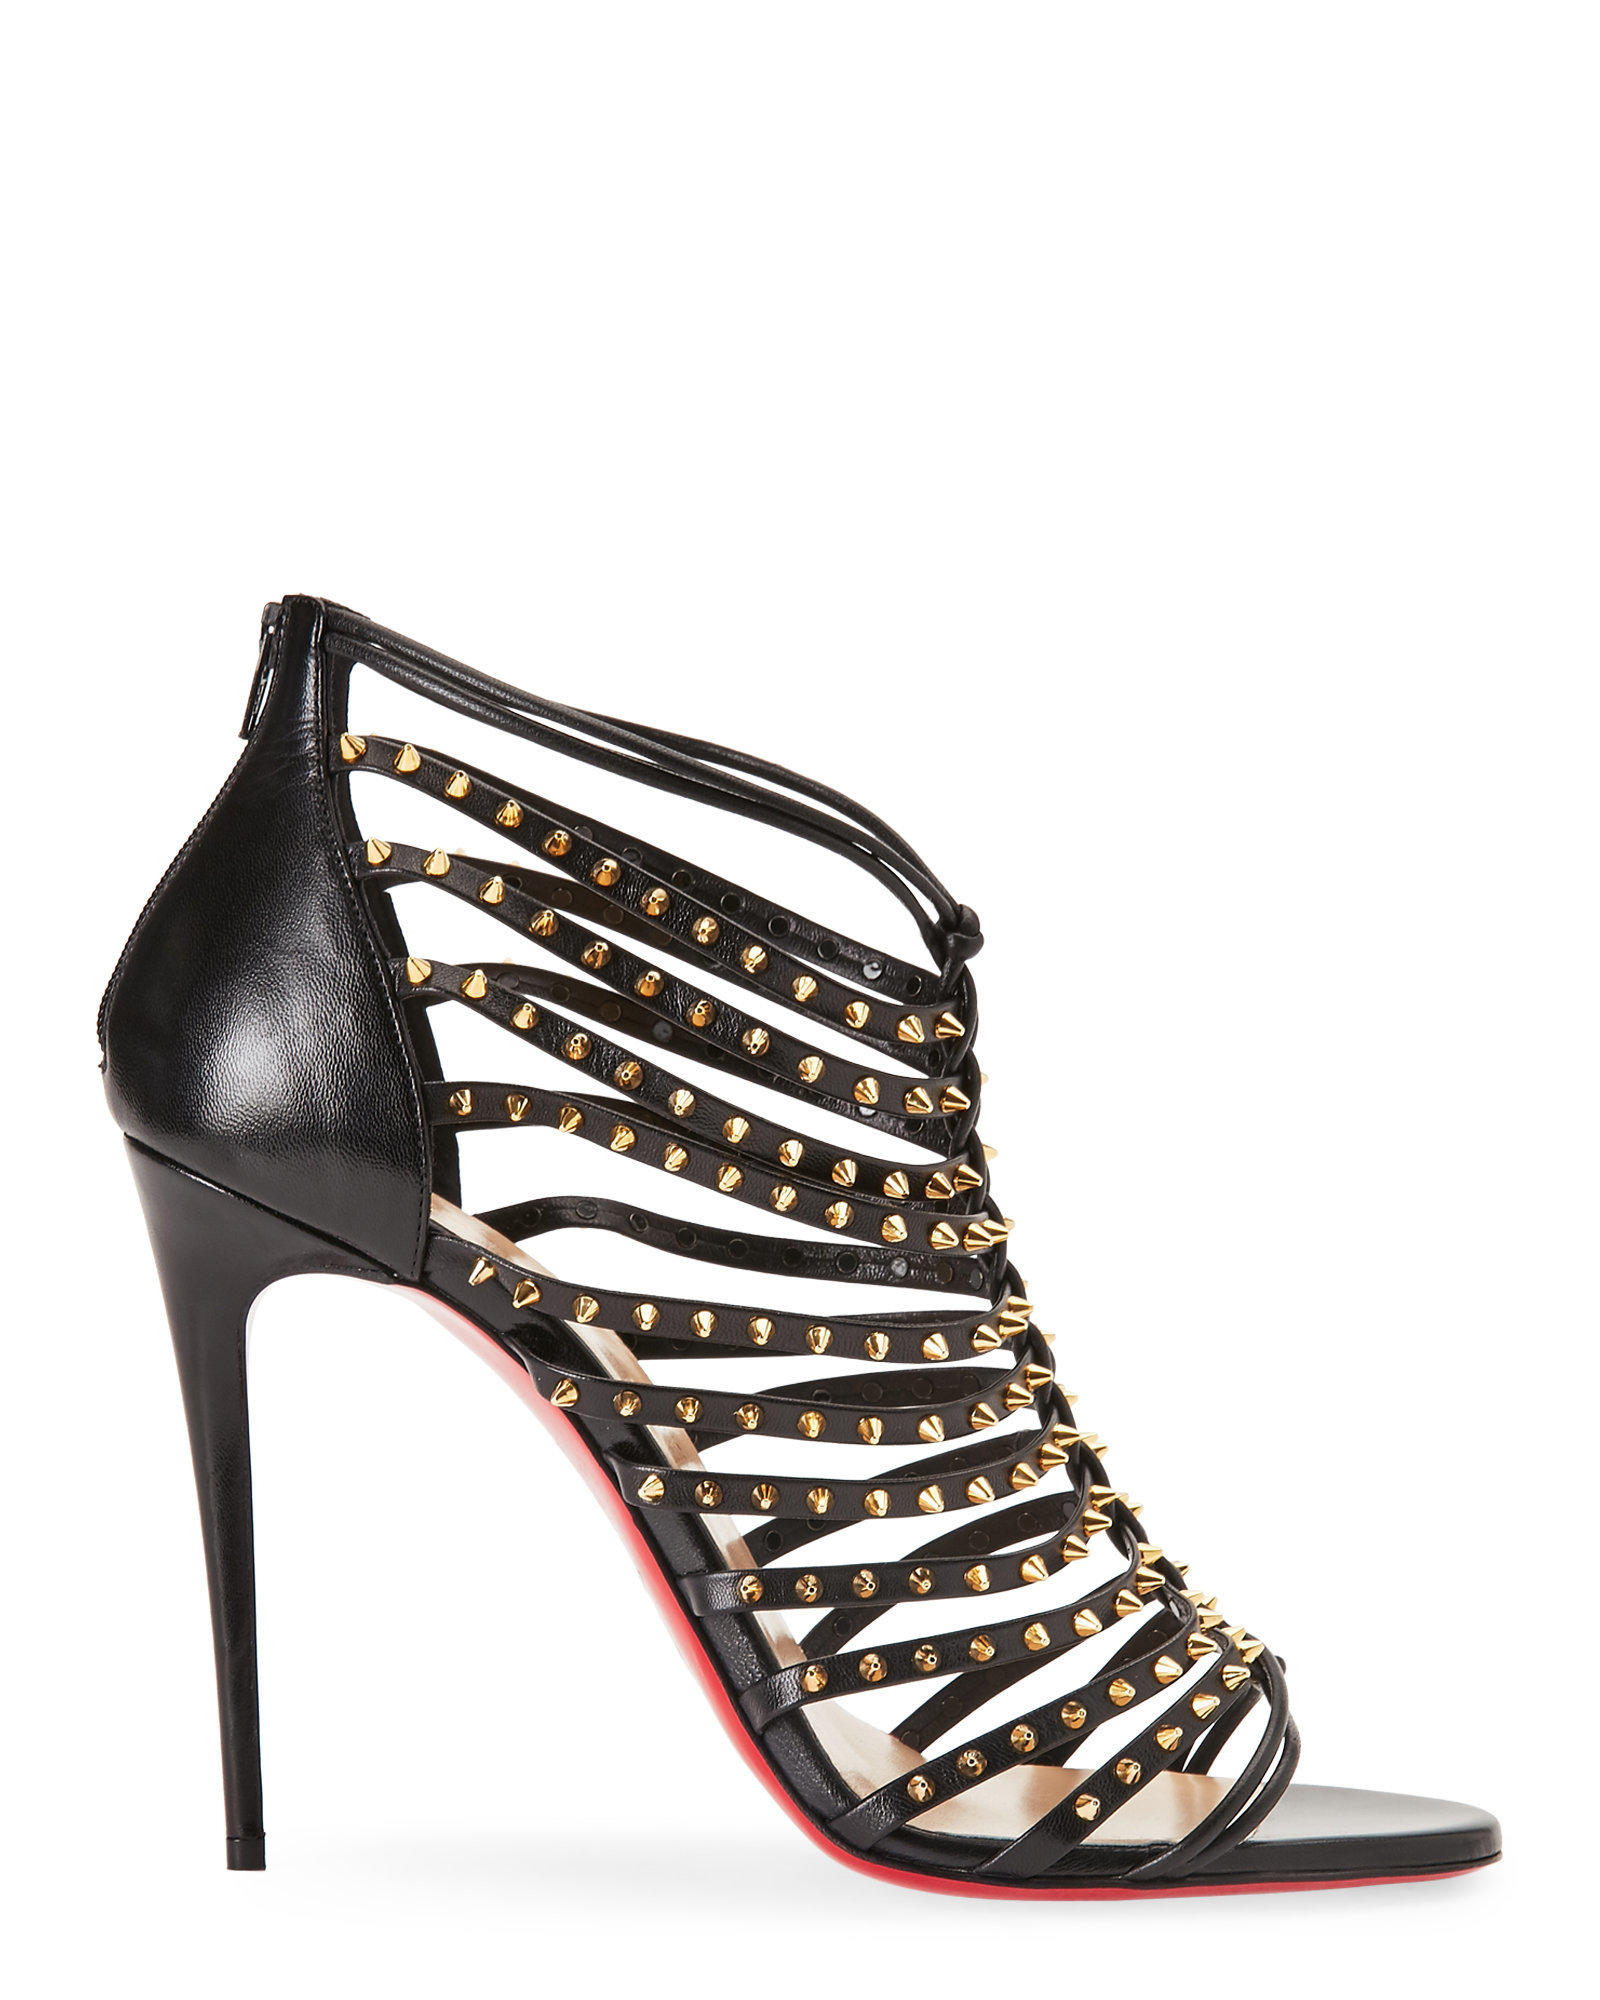 Lyst - Christian Louboutin Millaclou Studded Leather Cage Sandals in Black